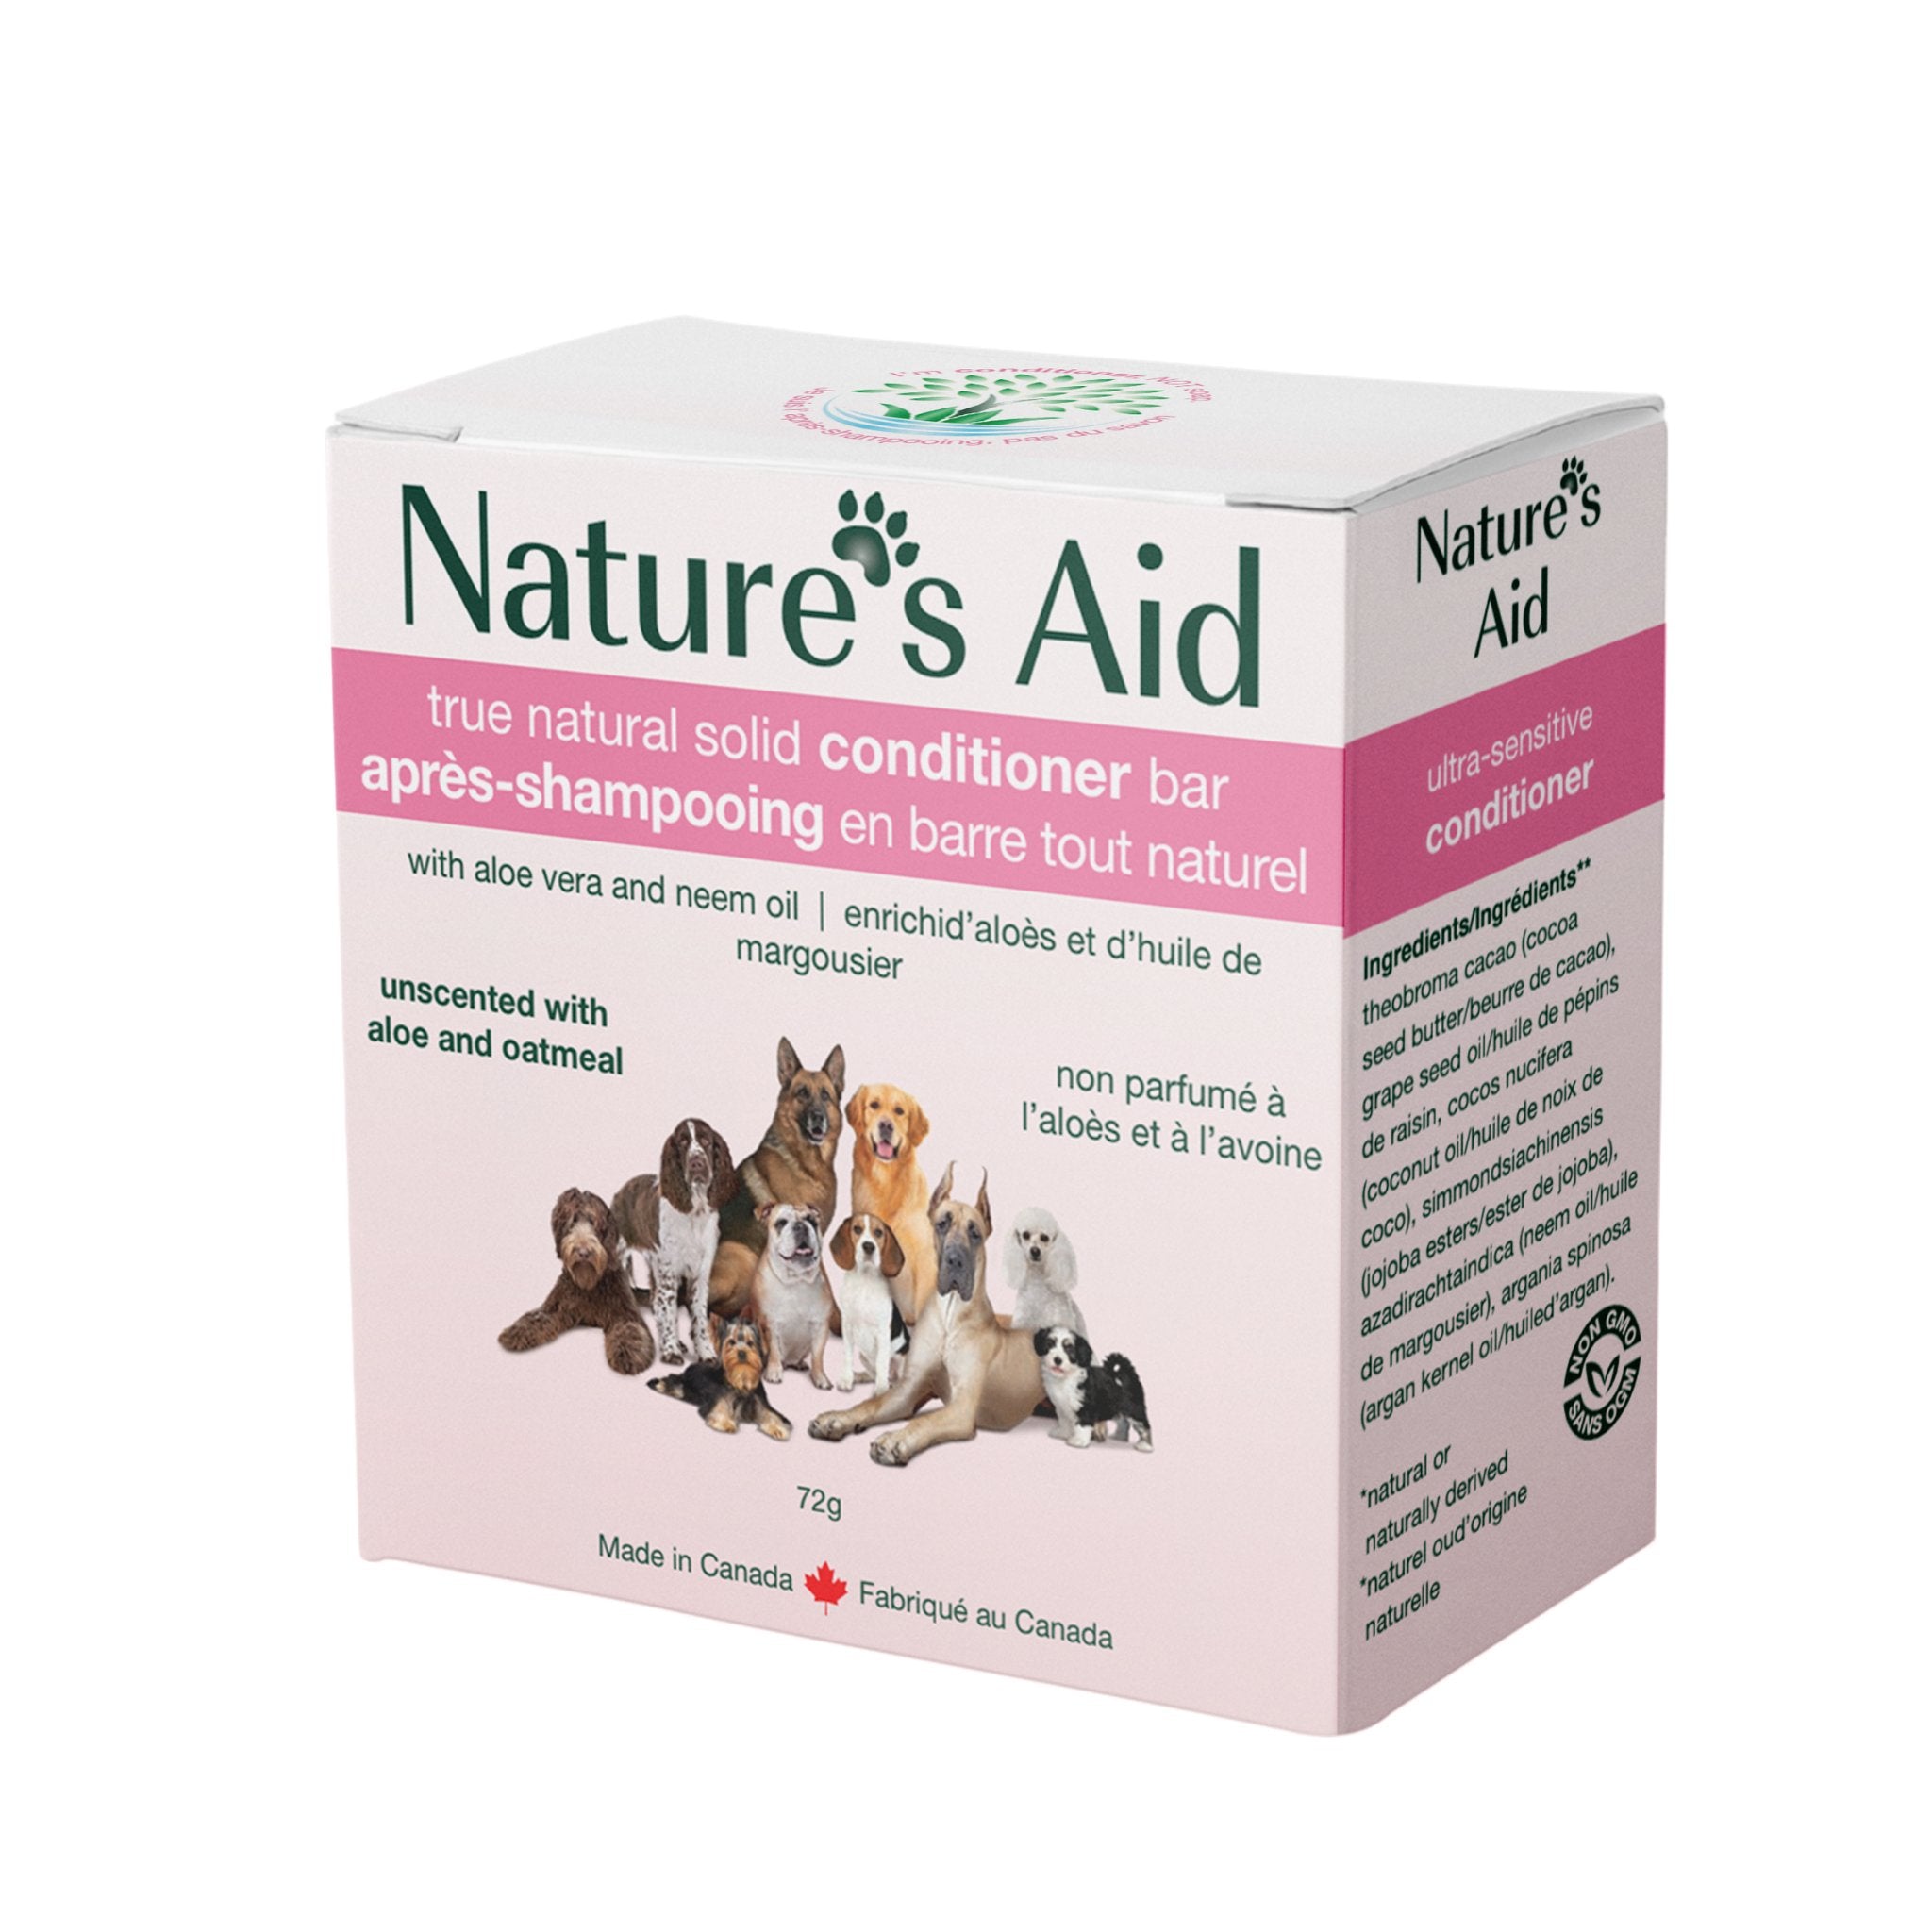 Pet Conditioner Bars - Nature's Aid, dogs, Eco-friendly